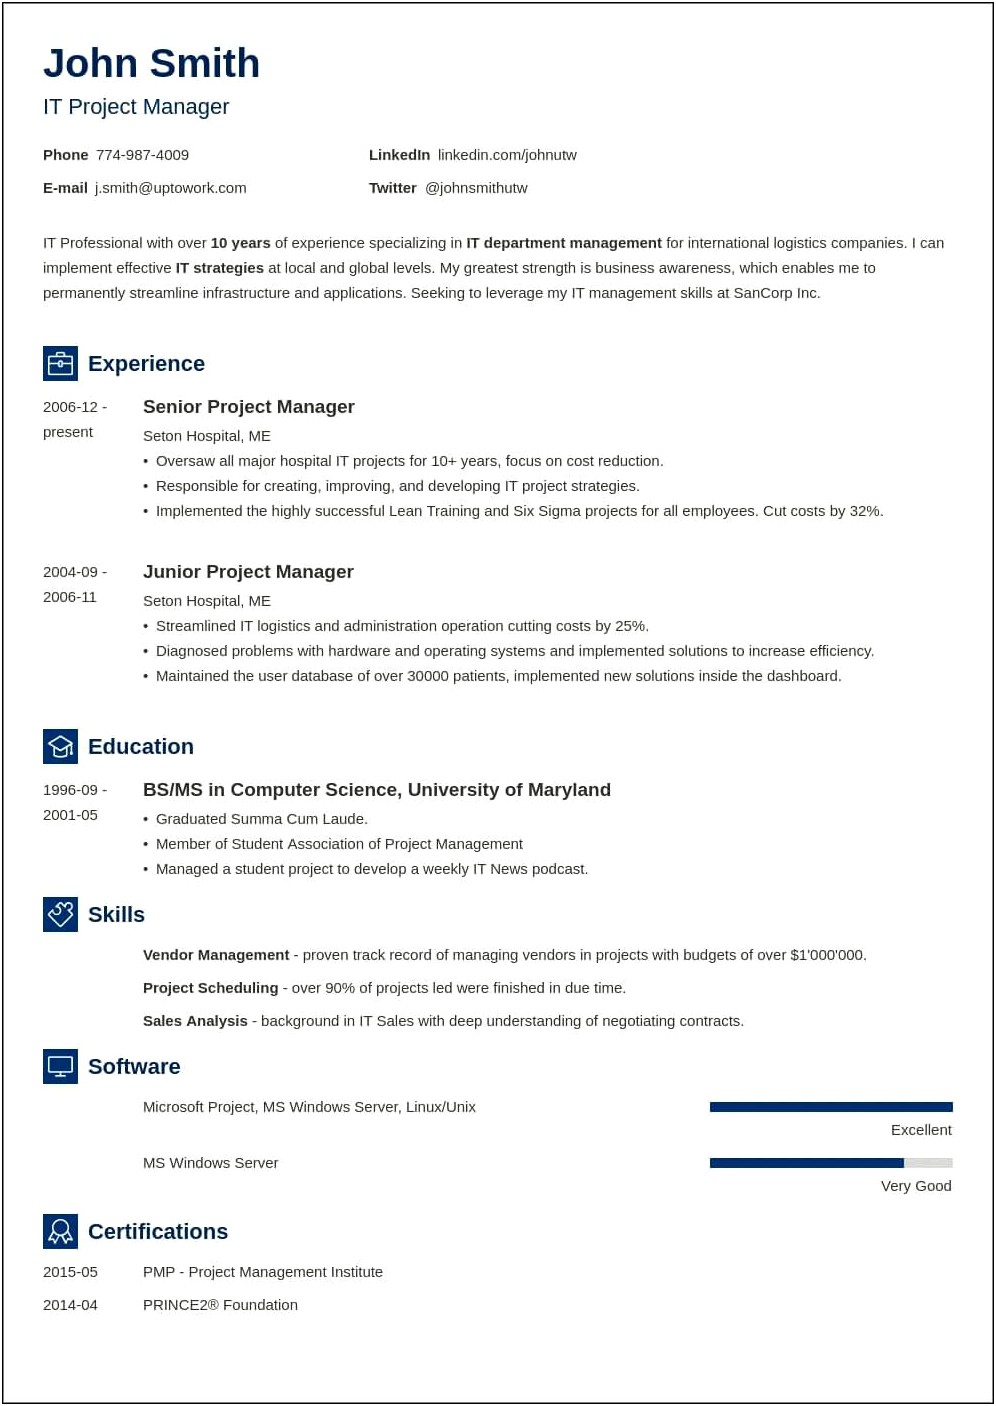 Resume Templates And Applicant Tracking Systems